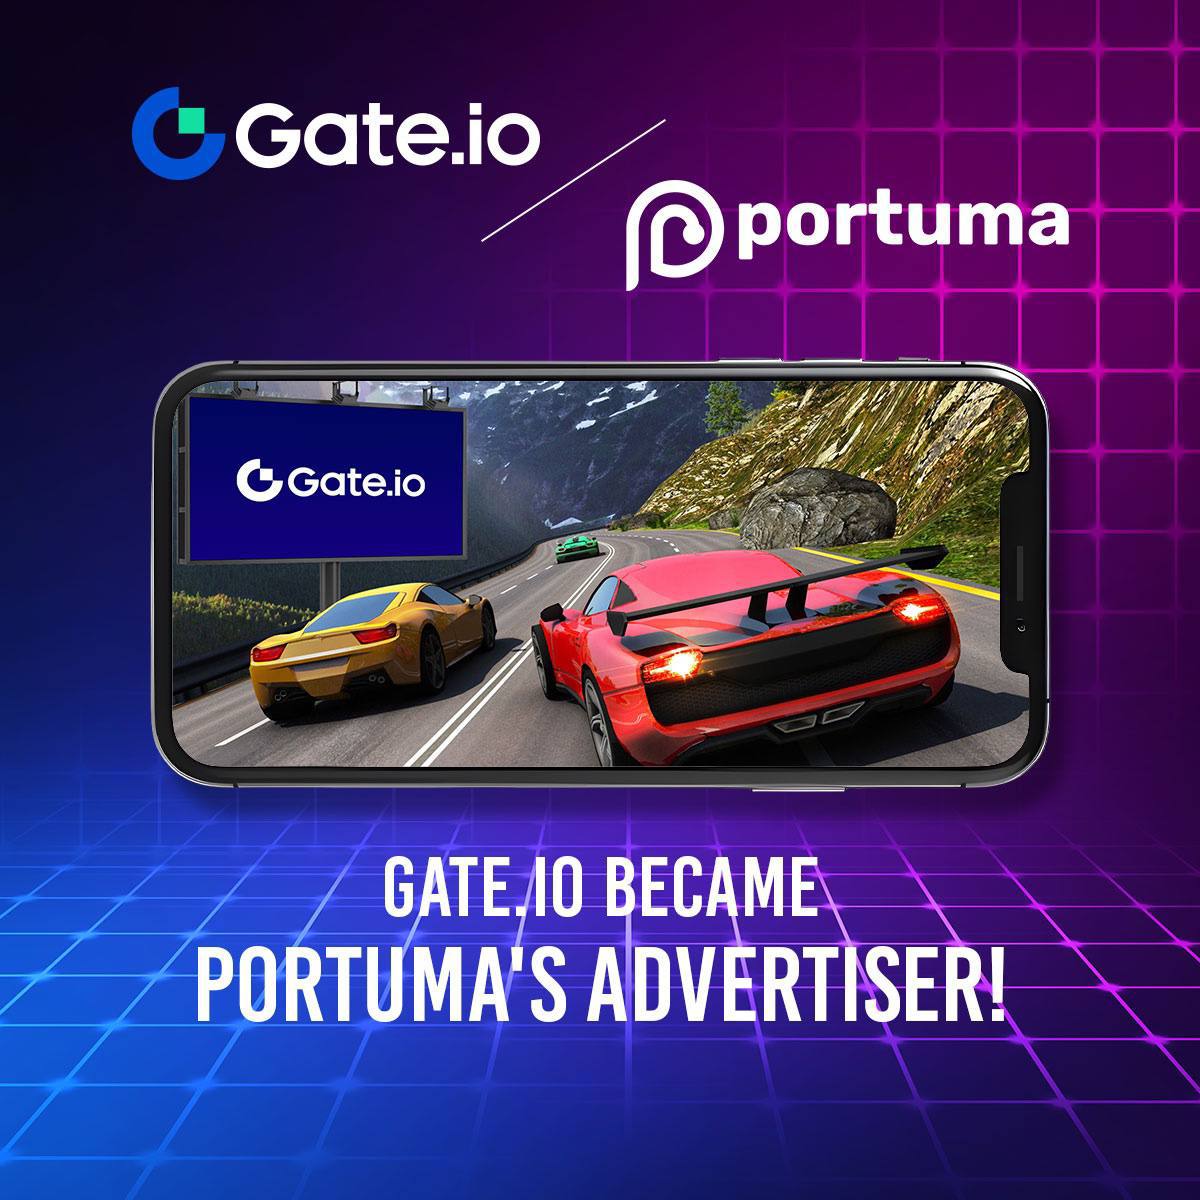 @AltCryptoGems Good Morning Sjuul. 
An exciting April 19 is coming! 😍 Bitcoin is entering the halving period, on the same date Portoken is listed on a stock exchange! 🚀What do you think about this important coincidence? 😎

@Portumatoken #Portuma #Portoken #Bsc #Bnb #TimeToPortuma #Binance